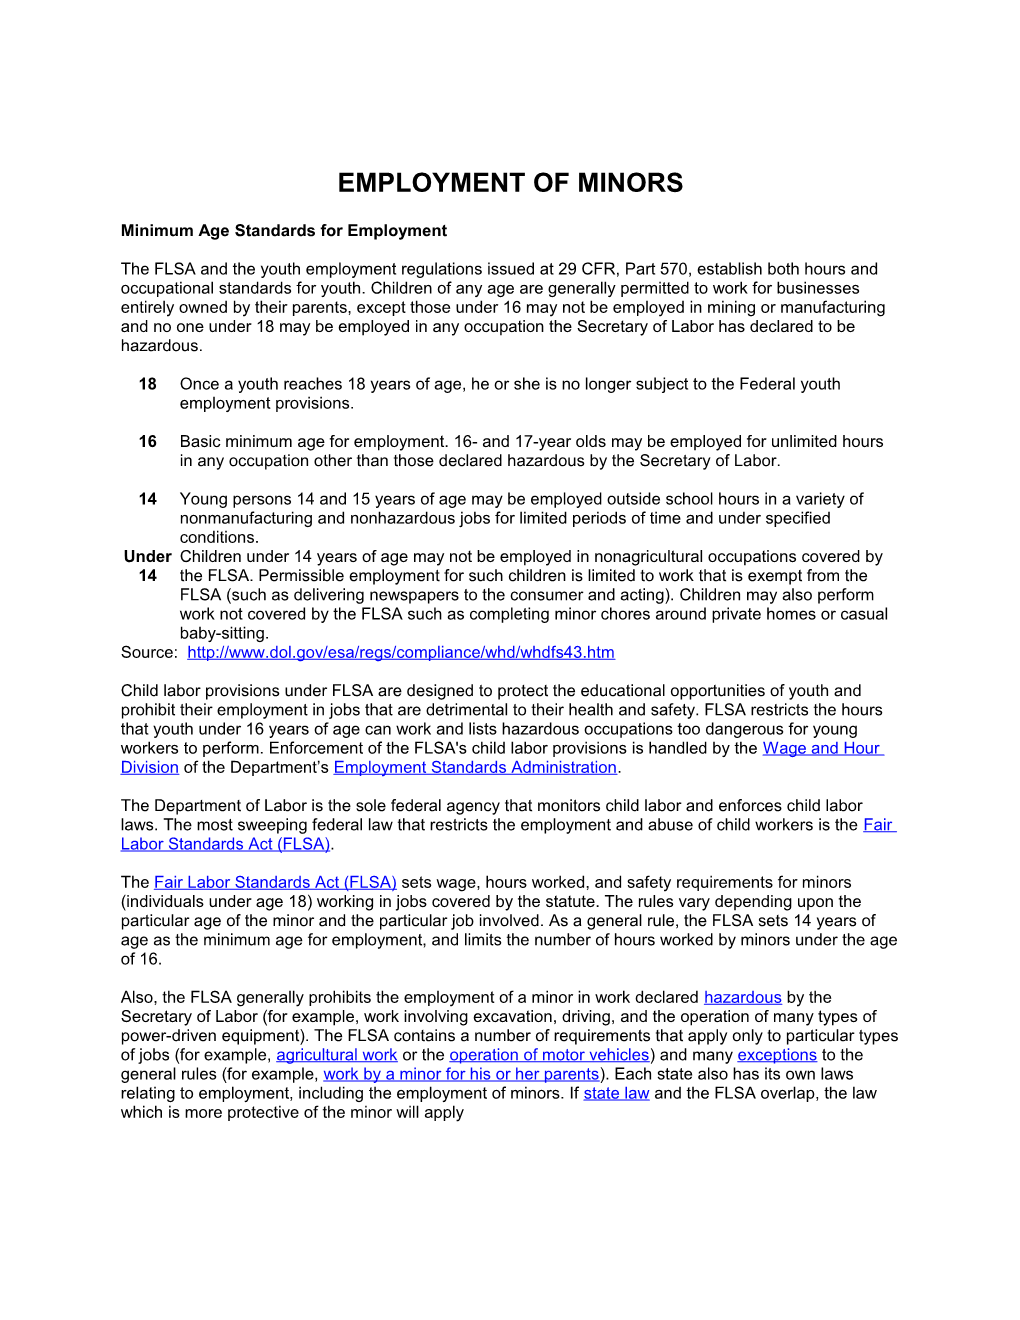 Employment of Minors